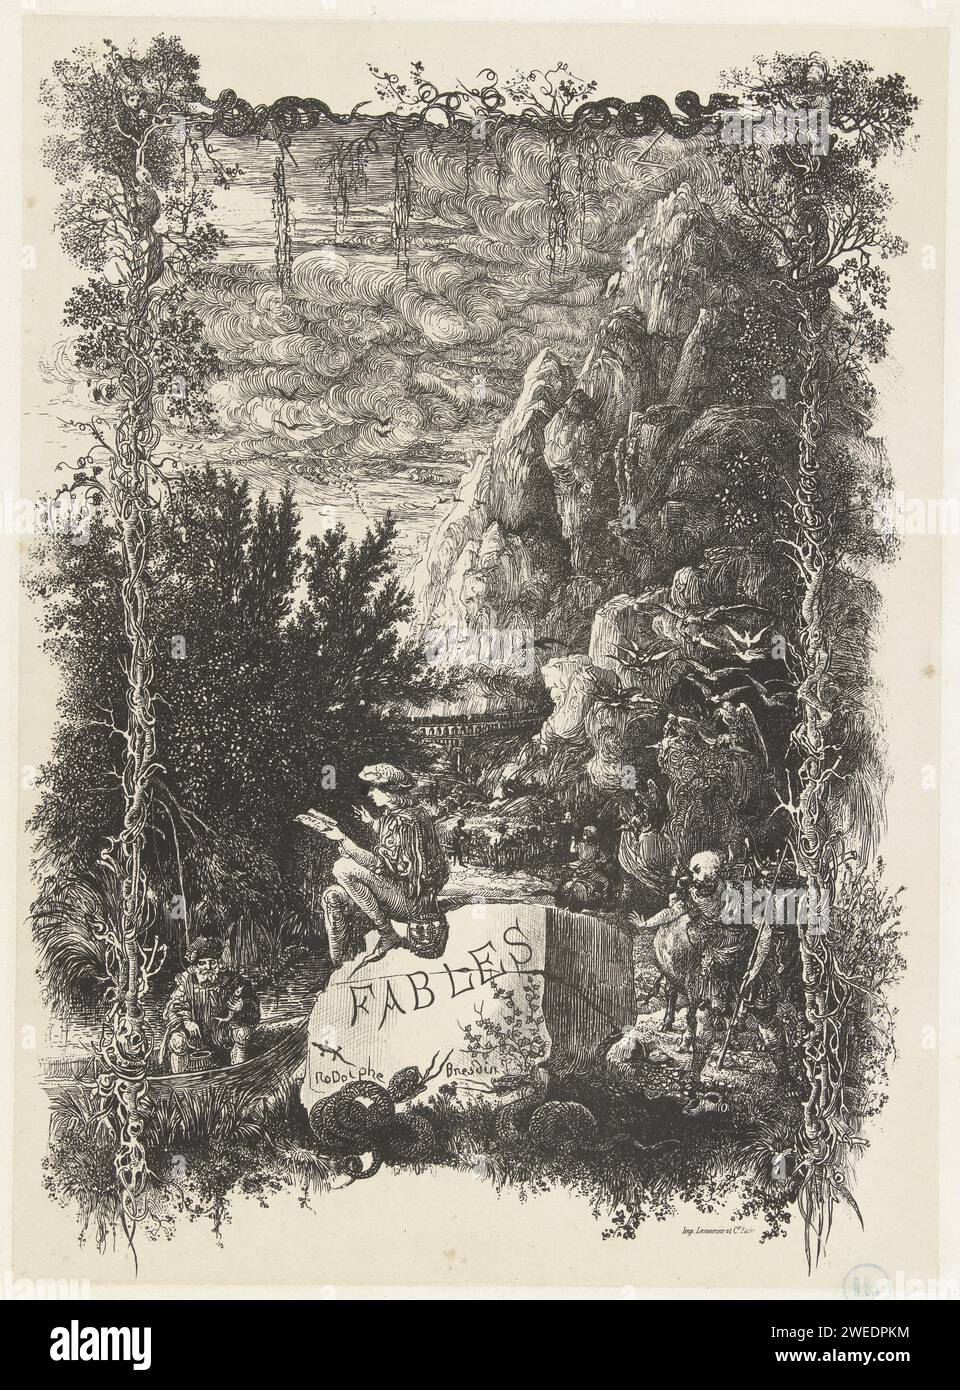 Title print with landscape and figures from fables and stories in frame with plants and snakes, Rodolphe Bresdin, 1868 print Title print with a landscape in which different figures are placed that appear in the fables and stories in the book for which this illustration was designed. There is a young man with a book on a large stone with the text Fables. On the right a man runs with a beef and he finds a broken jug and its contents. On the left a man is fishing in a boat. Birds or bats fly from a cave. In the background a rock rises high and a train disappears in a tunnel. The rectangular frame Stock Photo